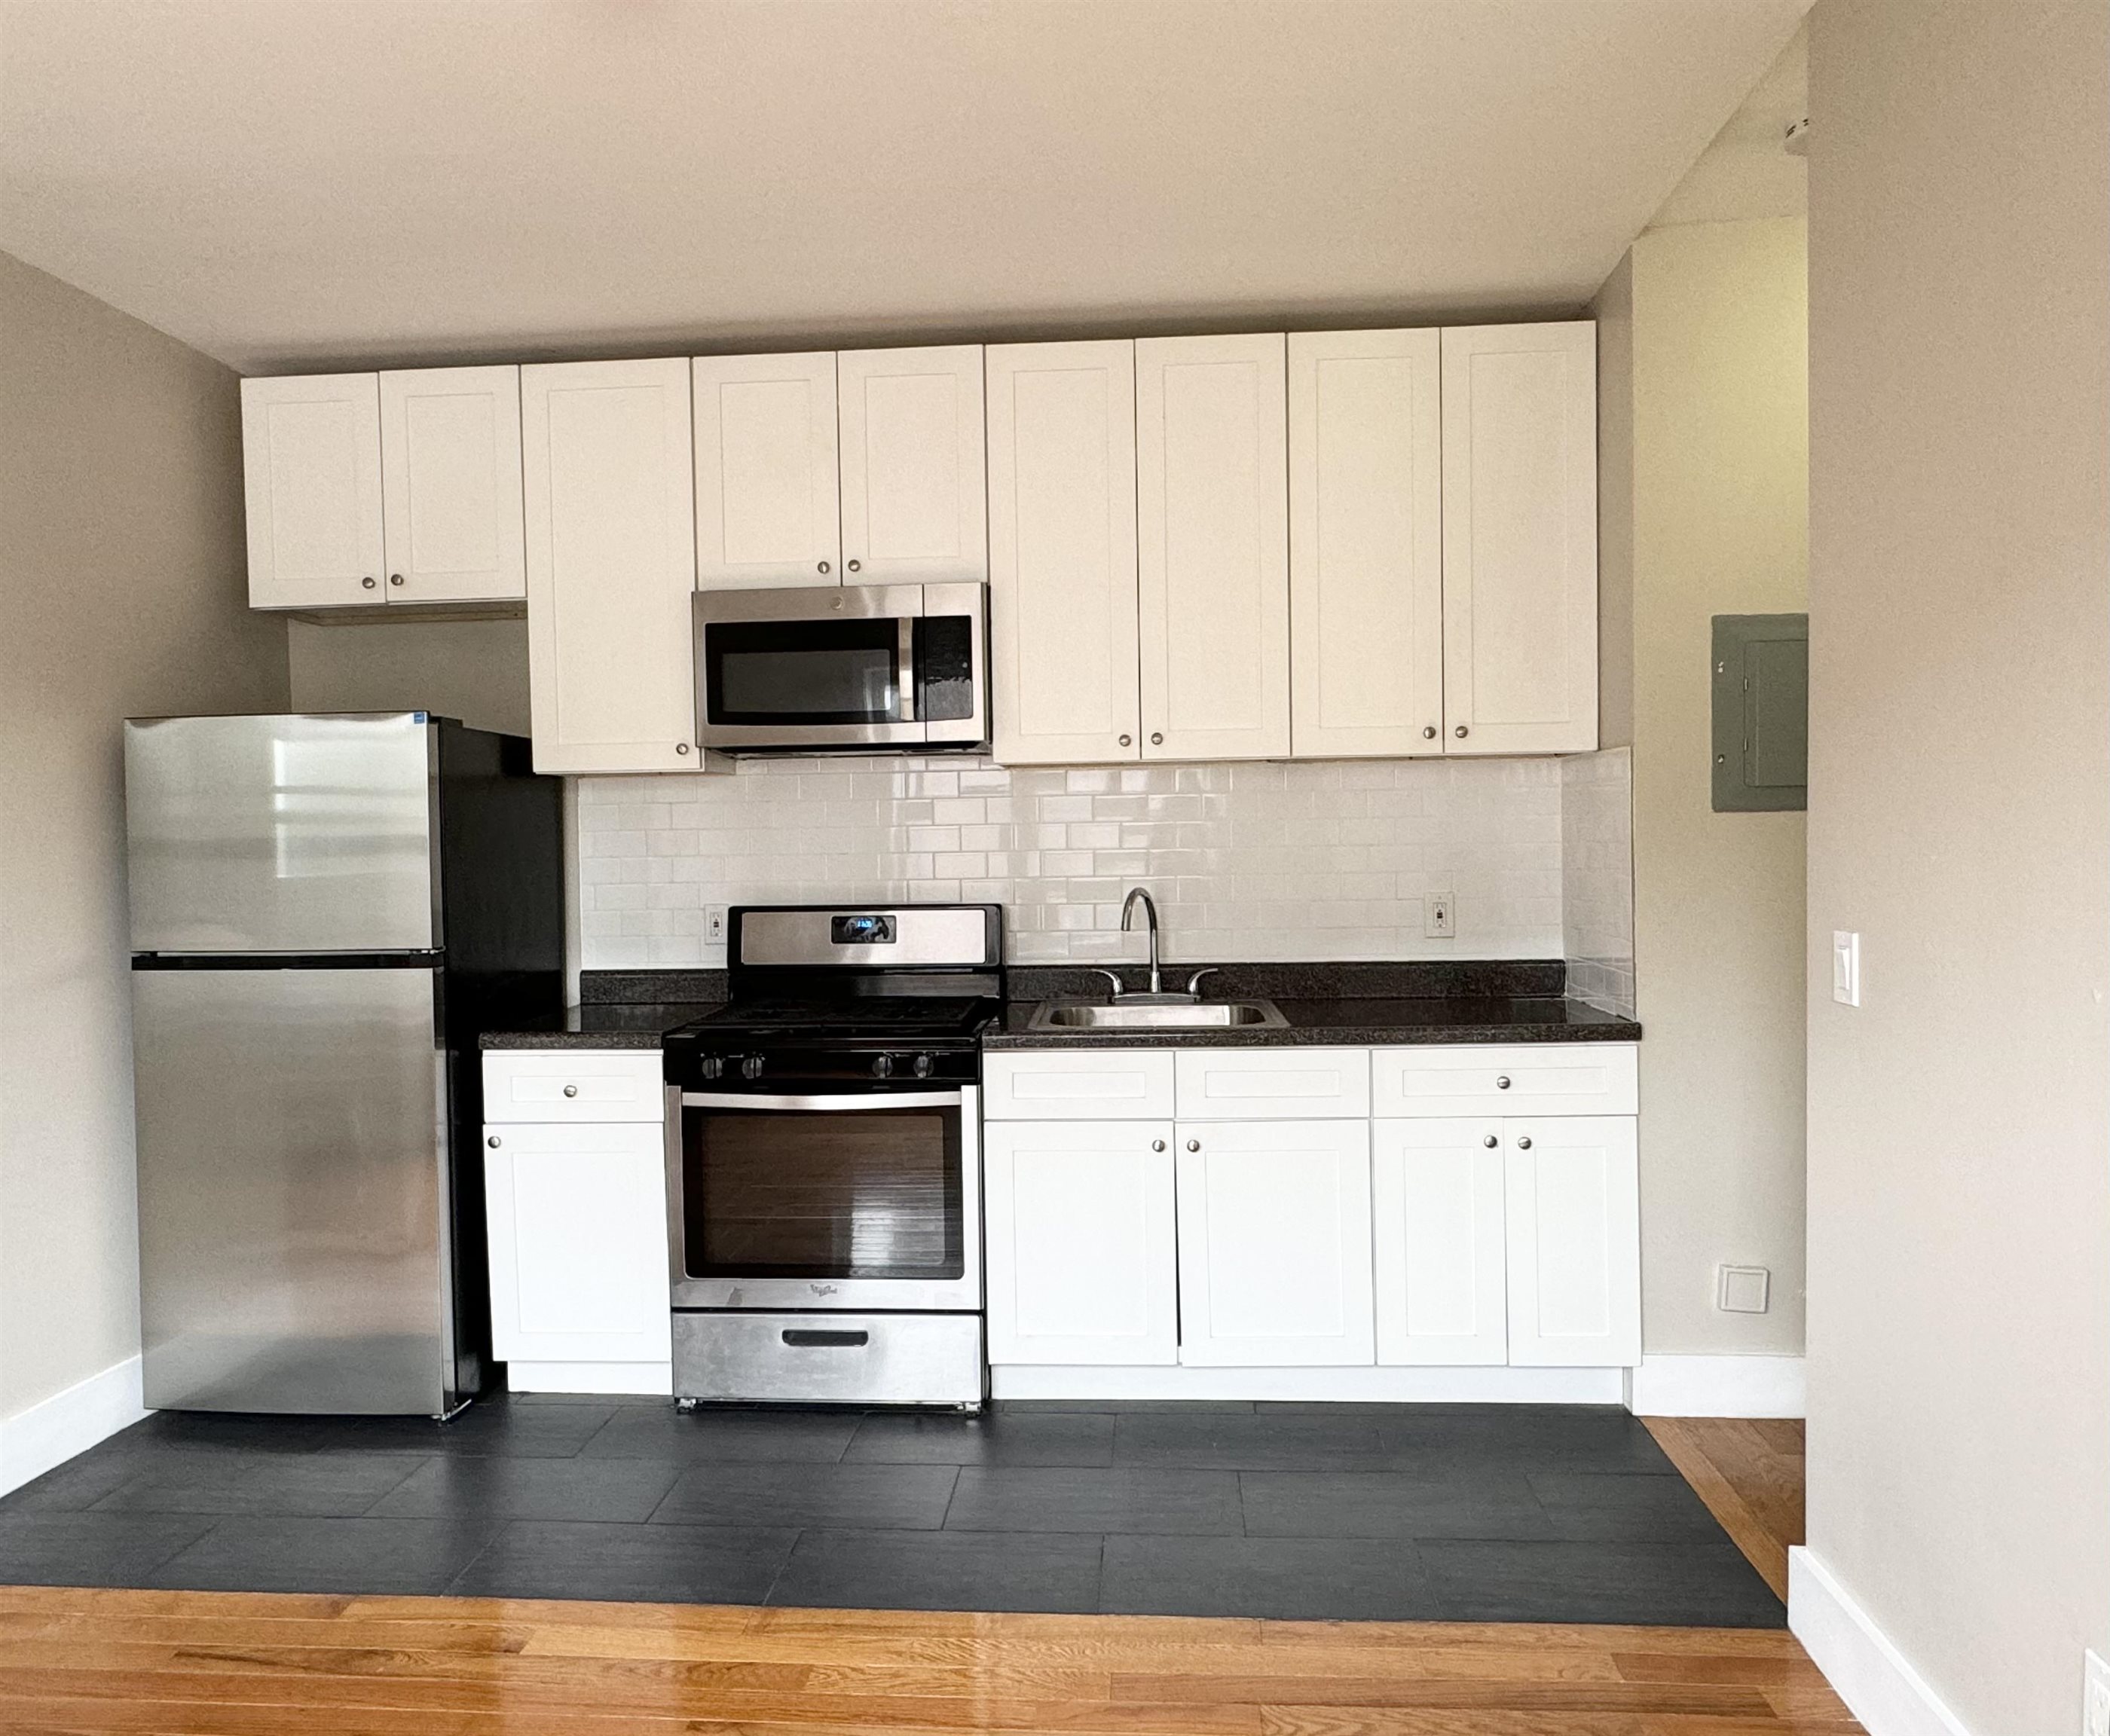 # 240009049 - For Rent in JERSEY CITY - Journal Square NJ